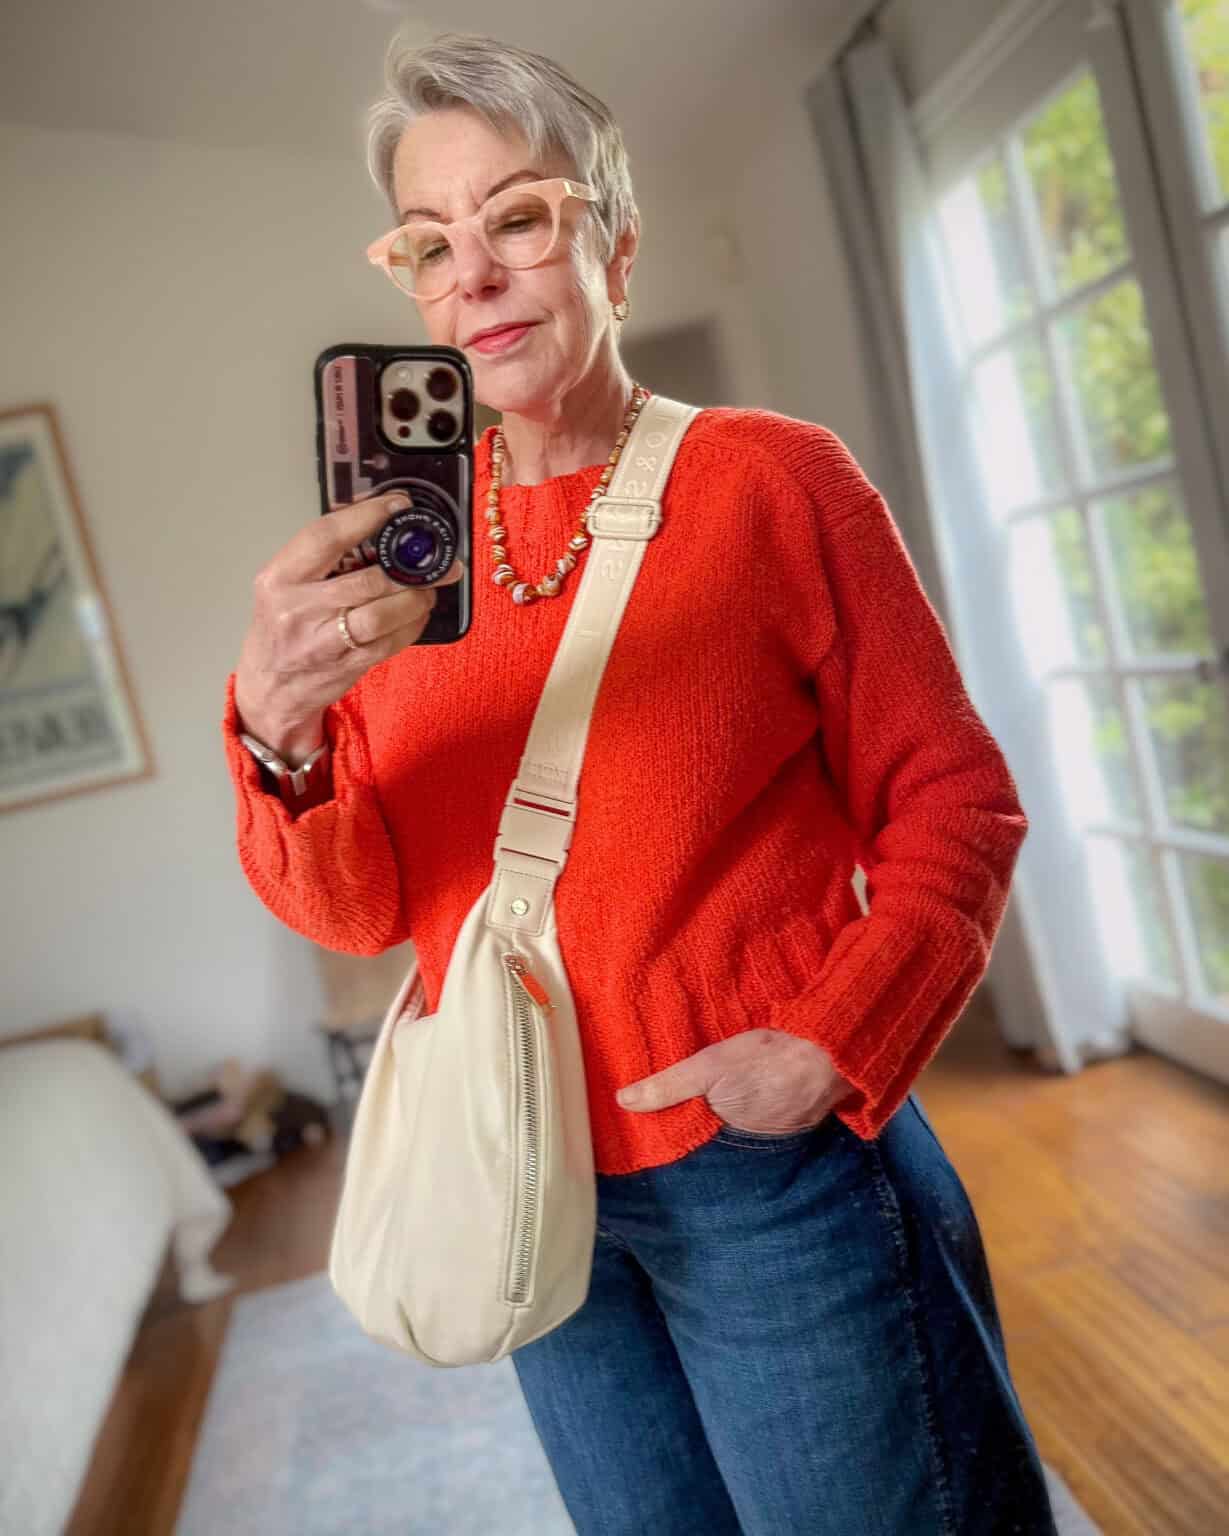 Susan B. shares side view of Lo & Sons Aoyama crossbody bag, also wearing a red sweater, brown bead necklace and blue jeans.